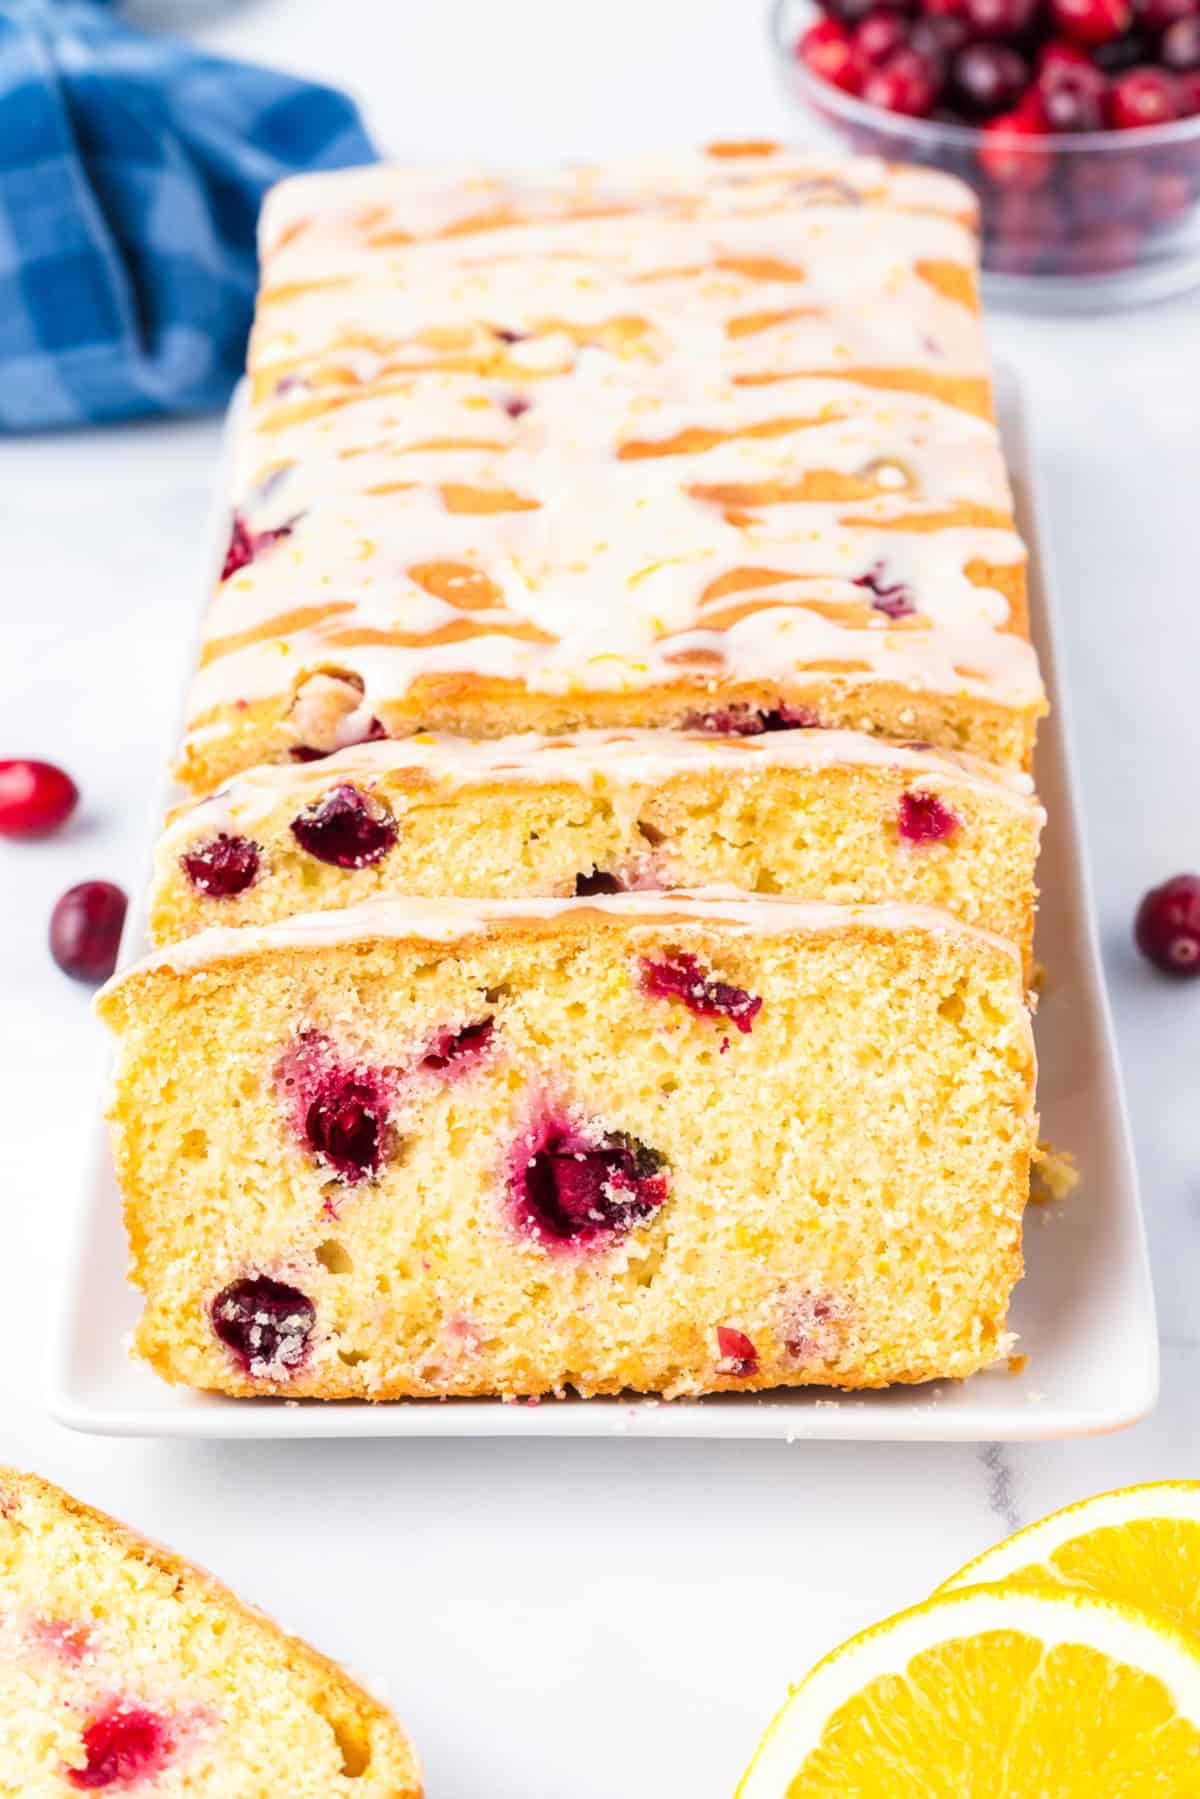 Cranberry orange bread with glaze sliced from the end to show the cranberries inside. on a platter from the end.